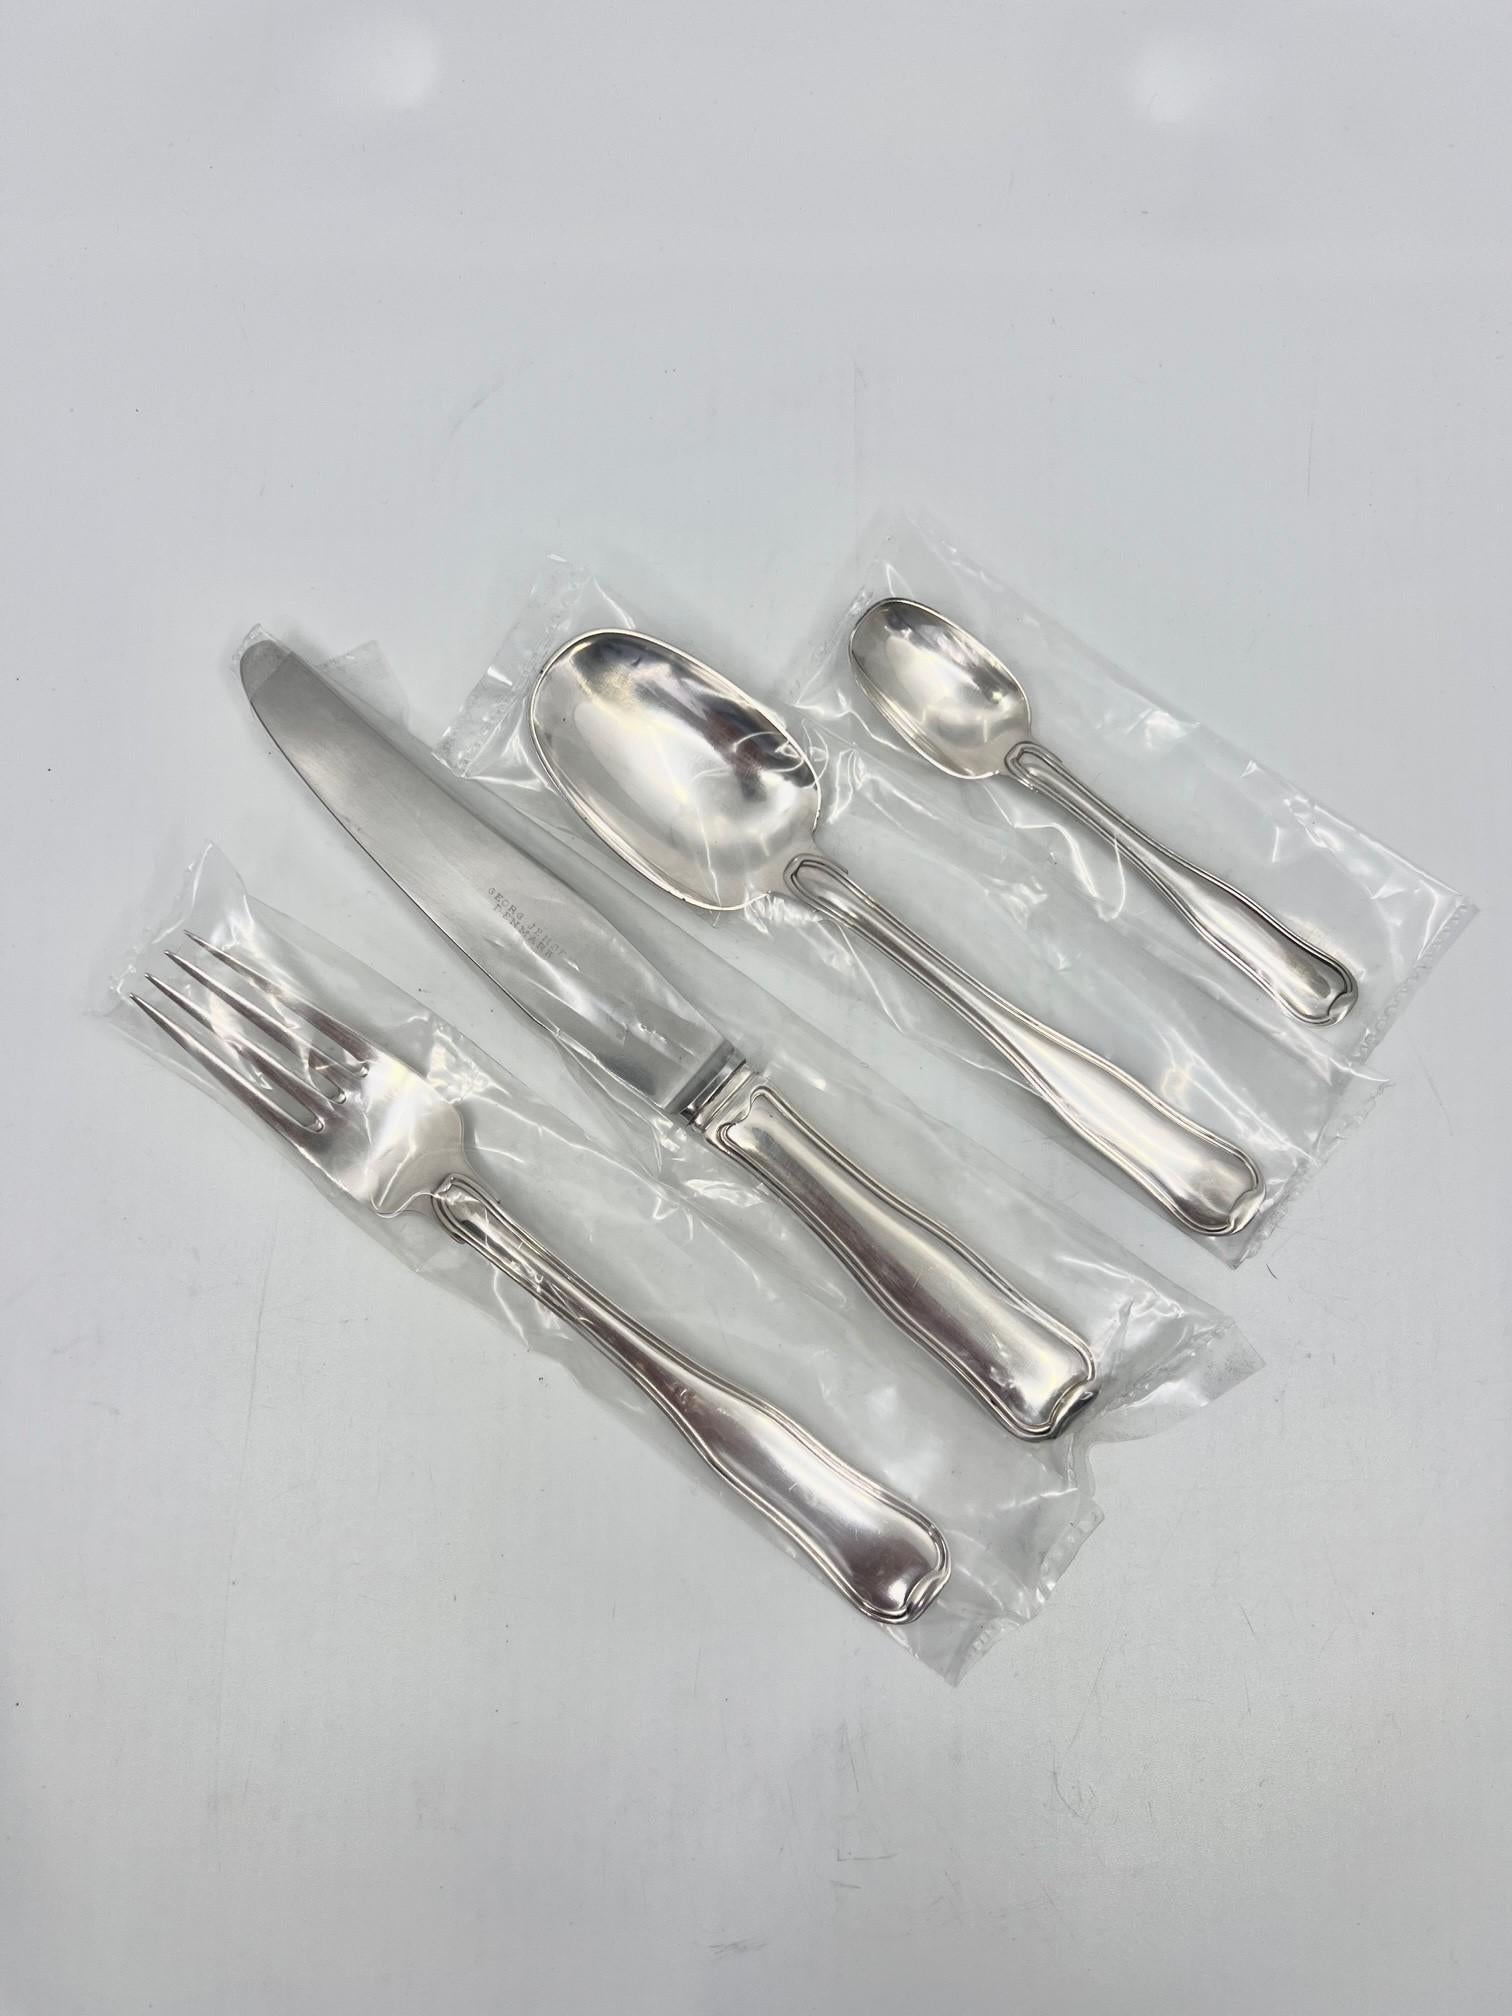 Georg Jensen Old Danish Sterling Silverware Set for 12 In Excellent Condition For Sale In Hellerup, DK